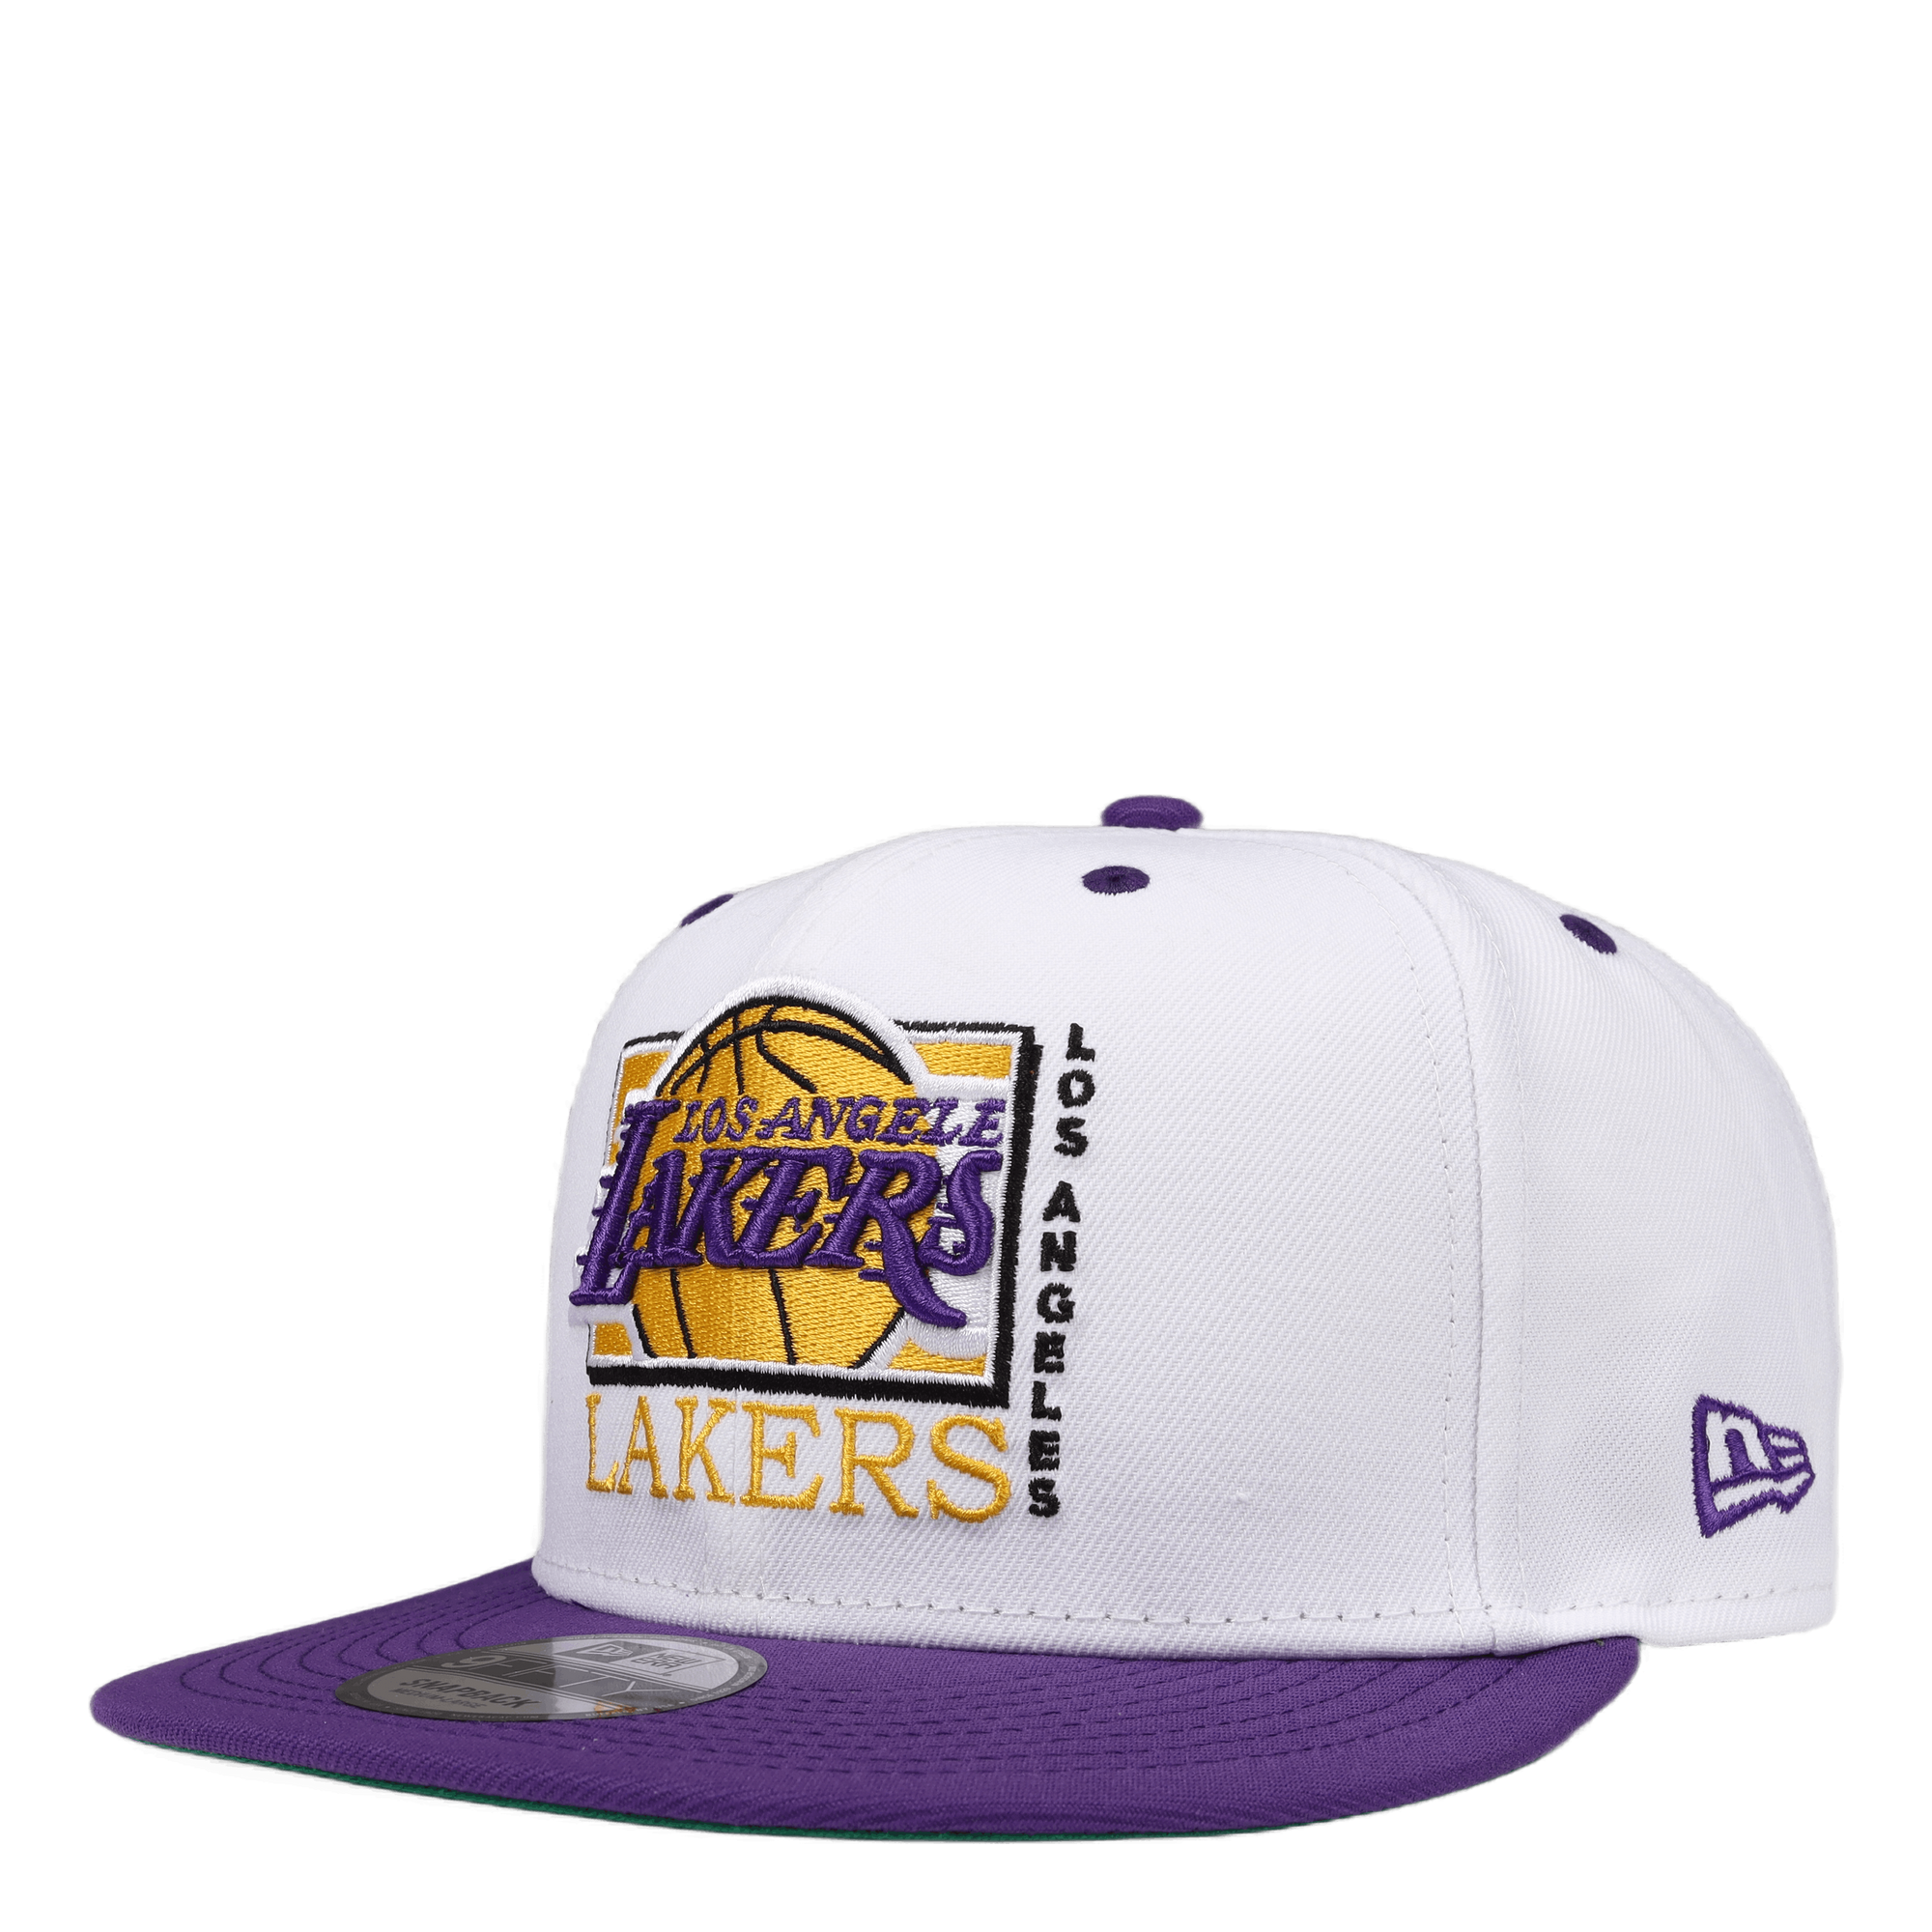 WHITE CROWN 950 LAKERS